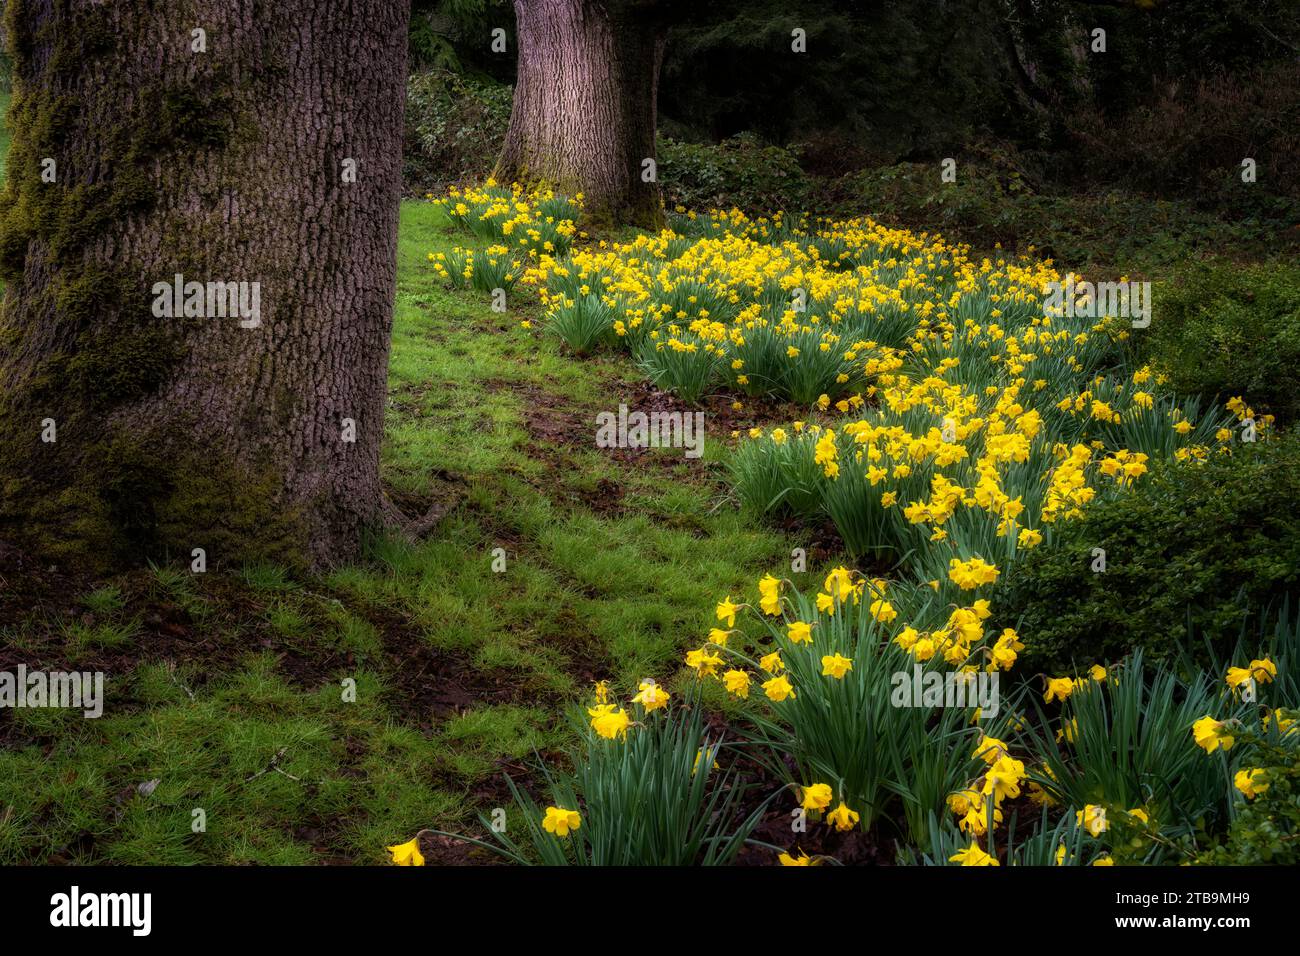 Dafodils and fog with large oak tree. Wilsonville, Oregon Stock Photo